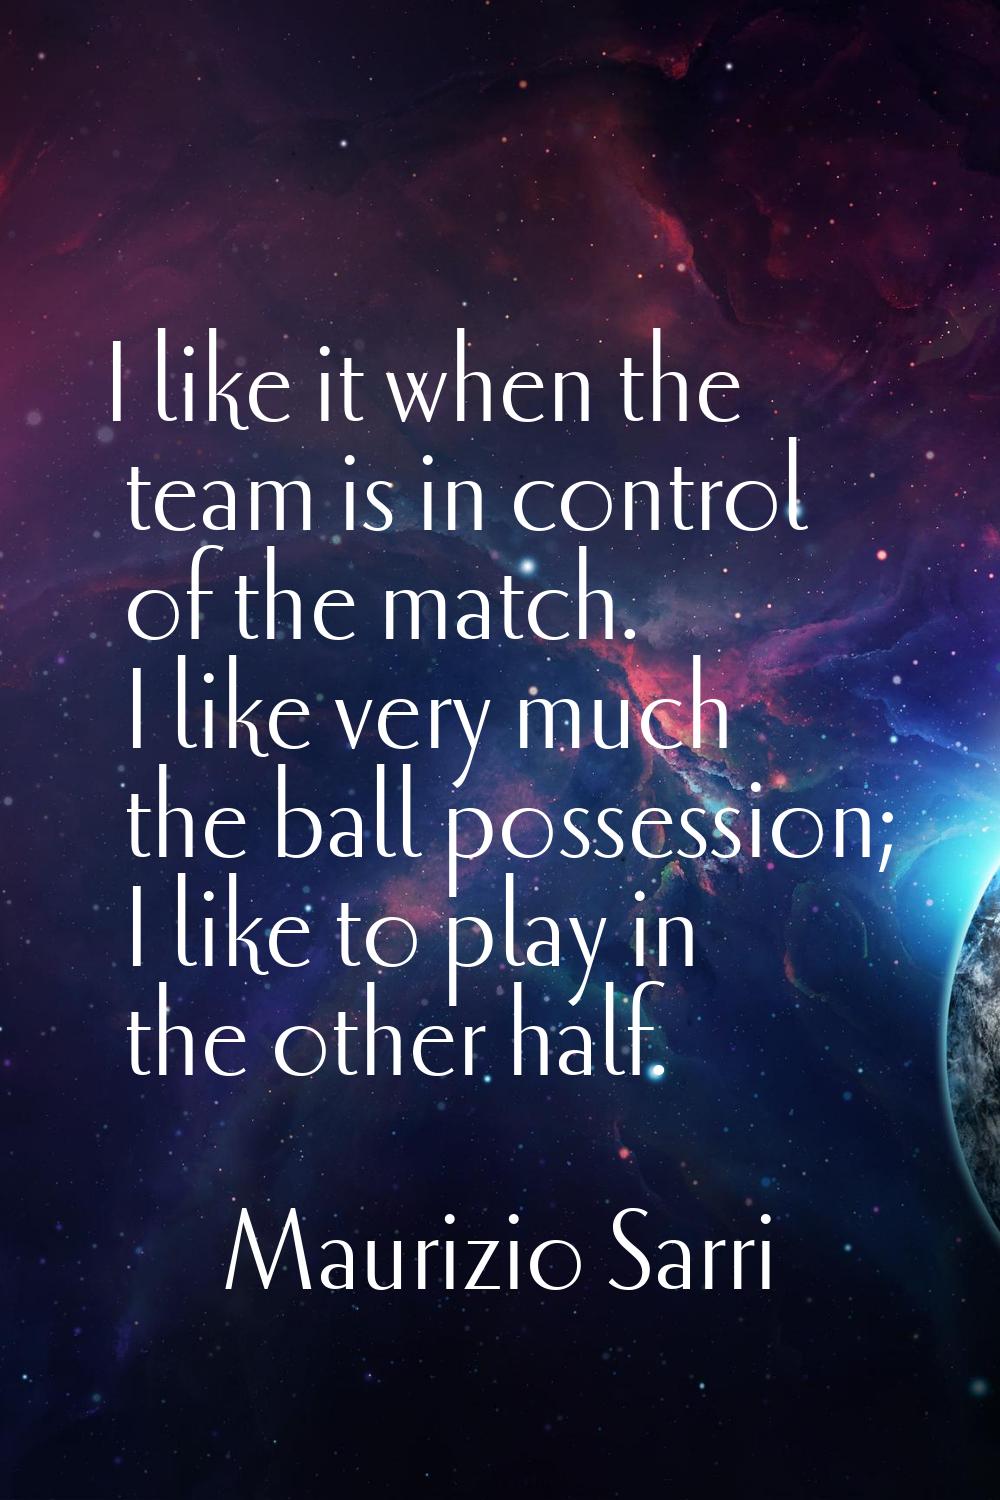 I like it when the team is in control of the match. I like very much the ball possession; I like to